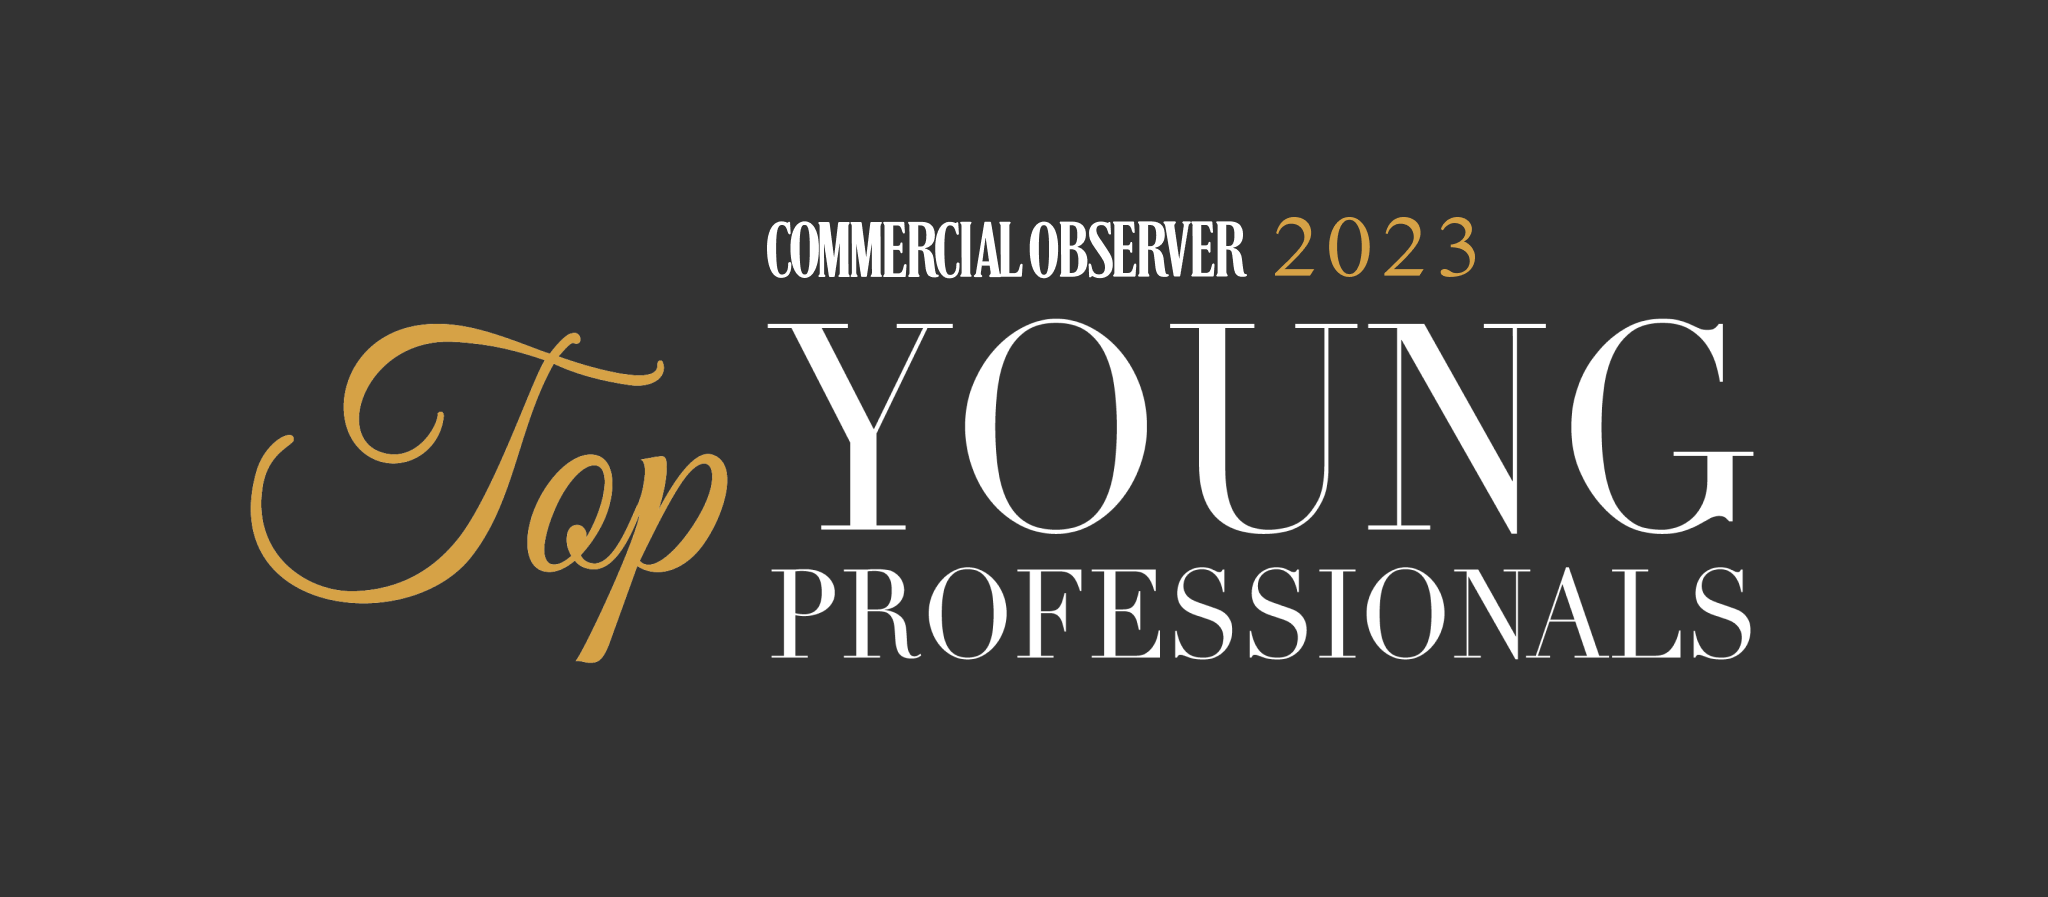 Top Young Professionals 2023 Featured Image